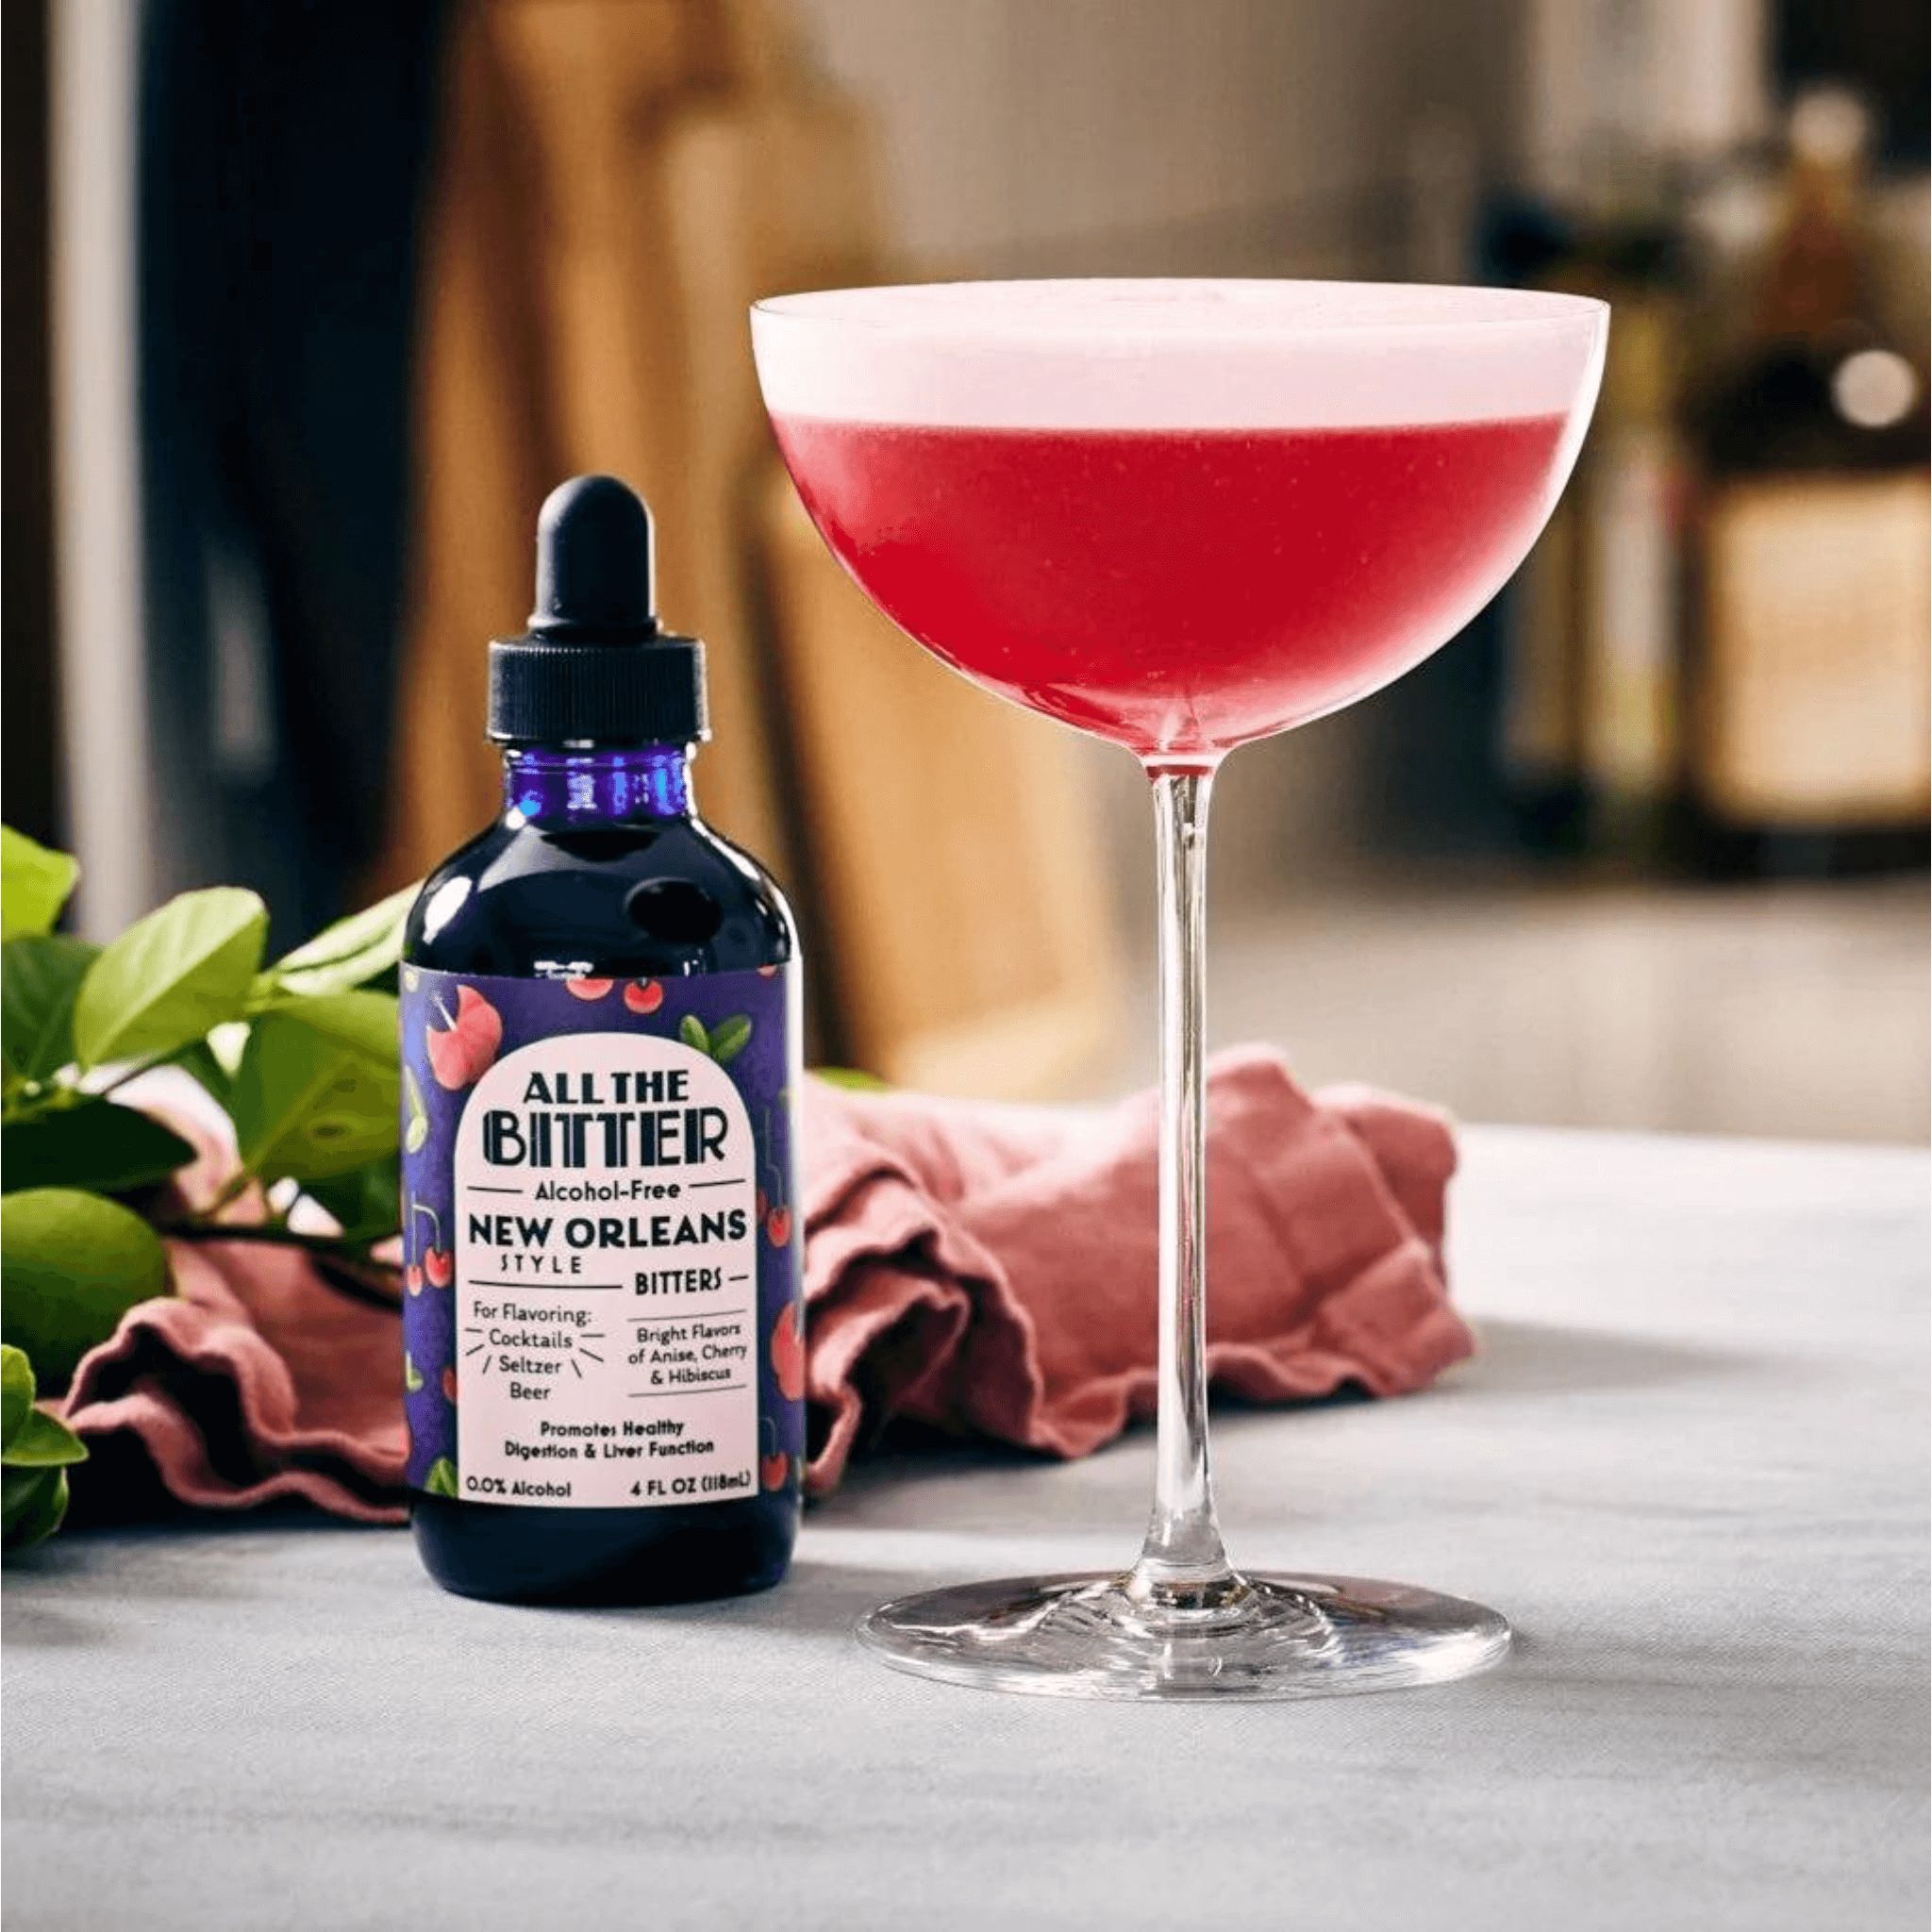 All the Bitter New Orleans Bitters for Wine & Cocktails (Alcohol-Free)